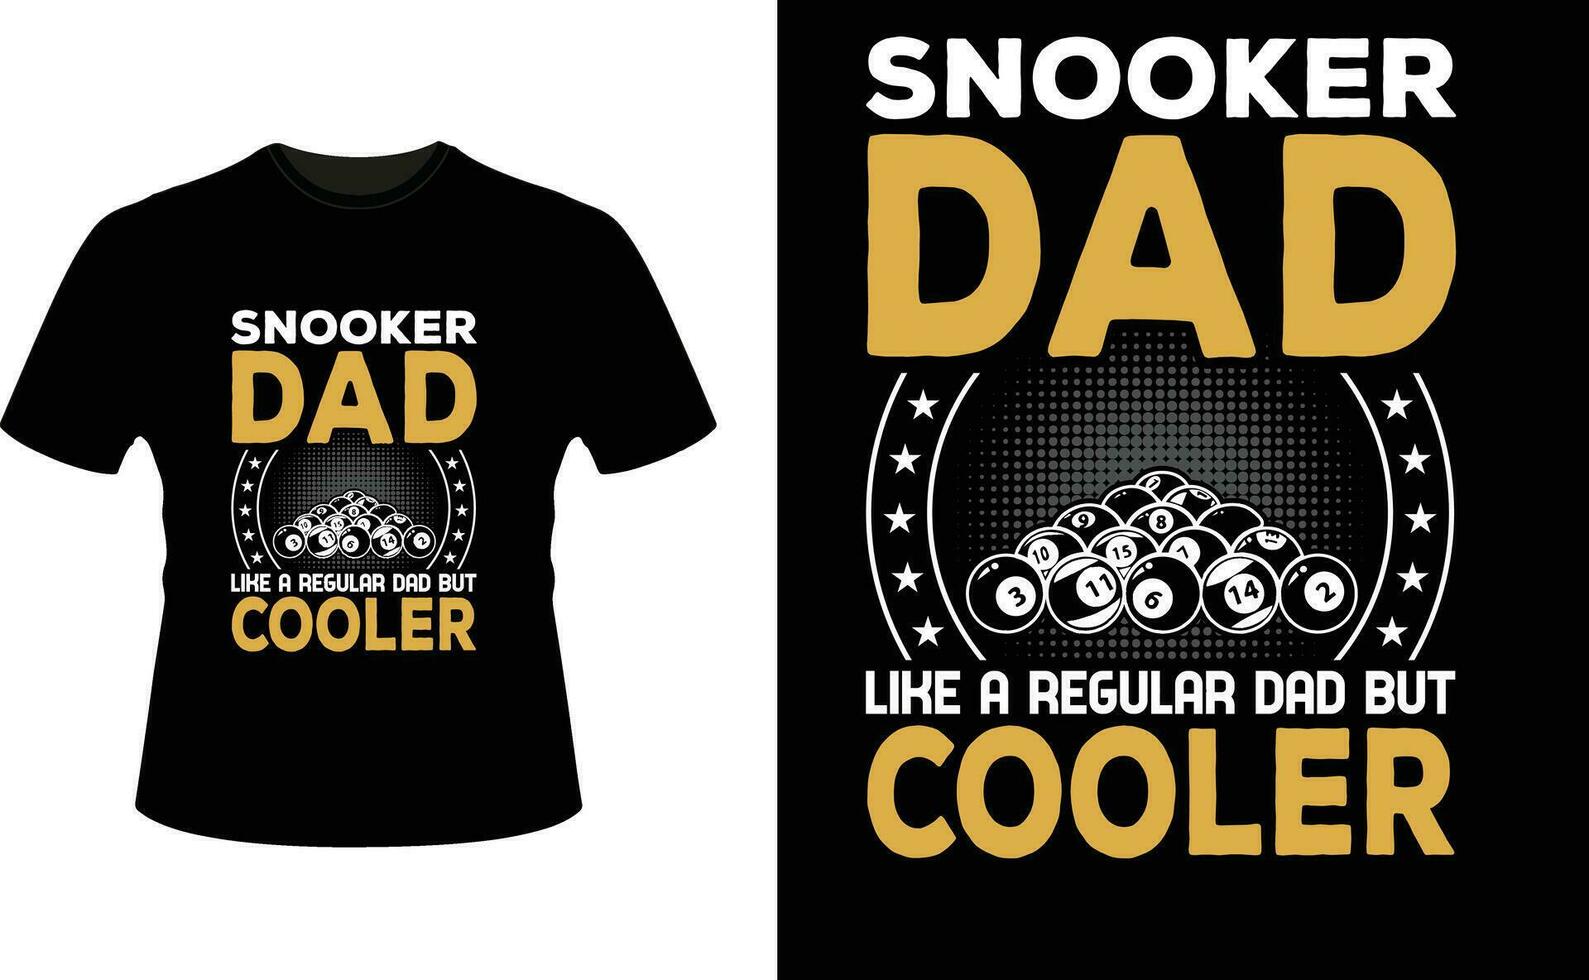 Snooker Dad Like a Regular Dad But Cooler or dad papa tshirt design or Father day t shirt Design vector